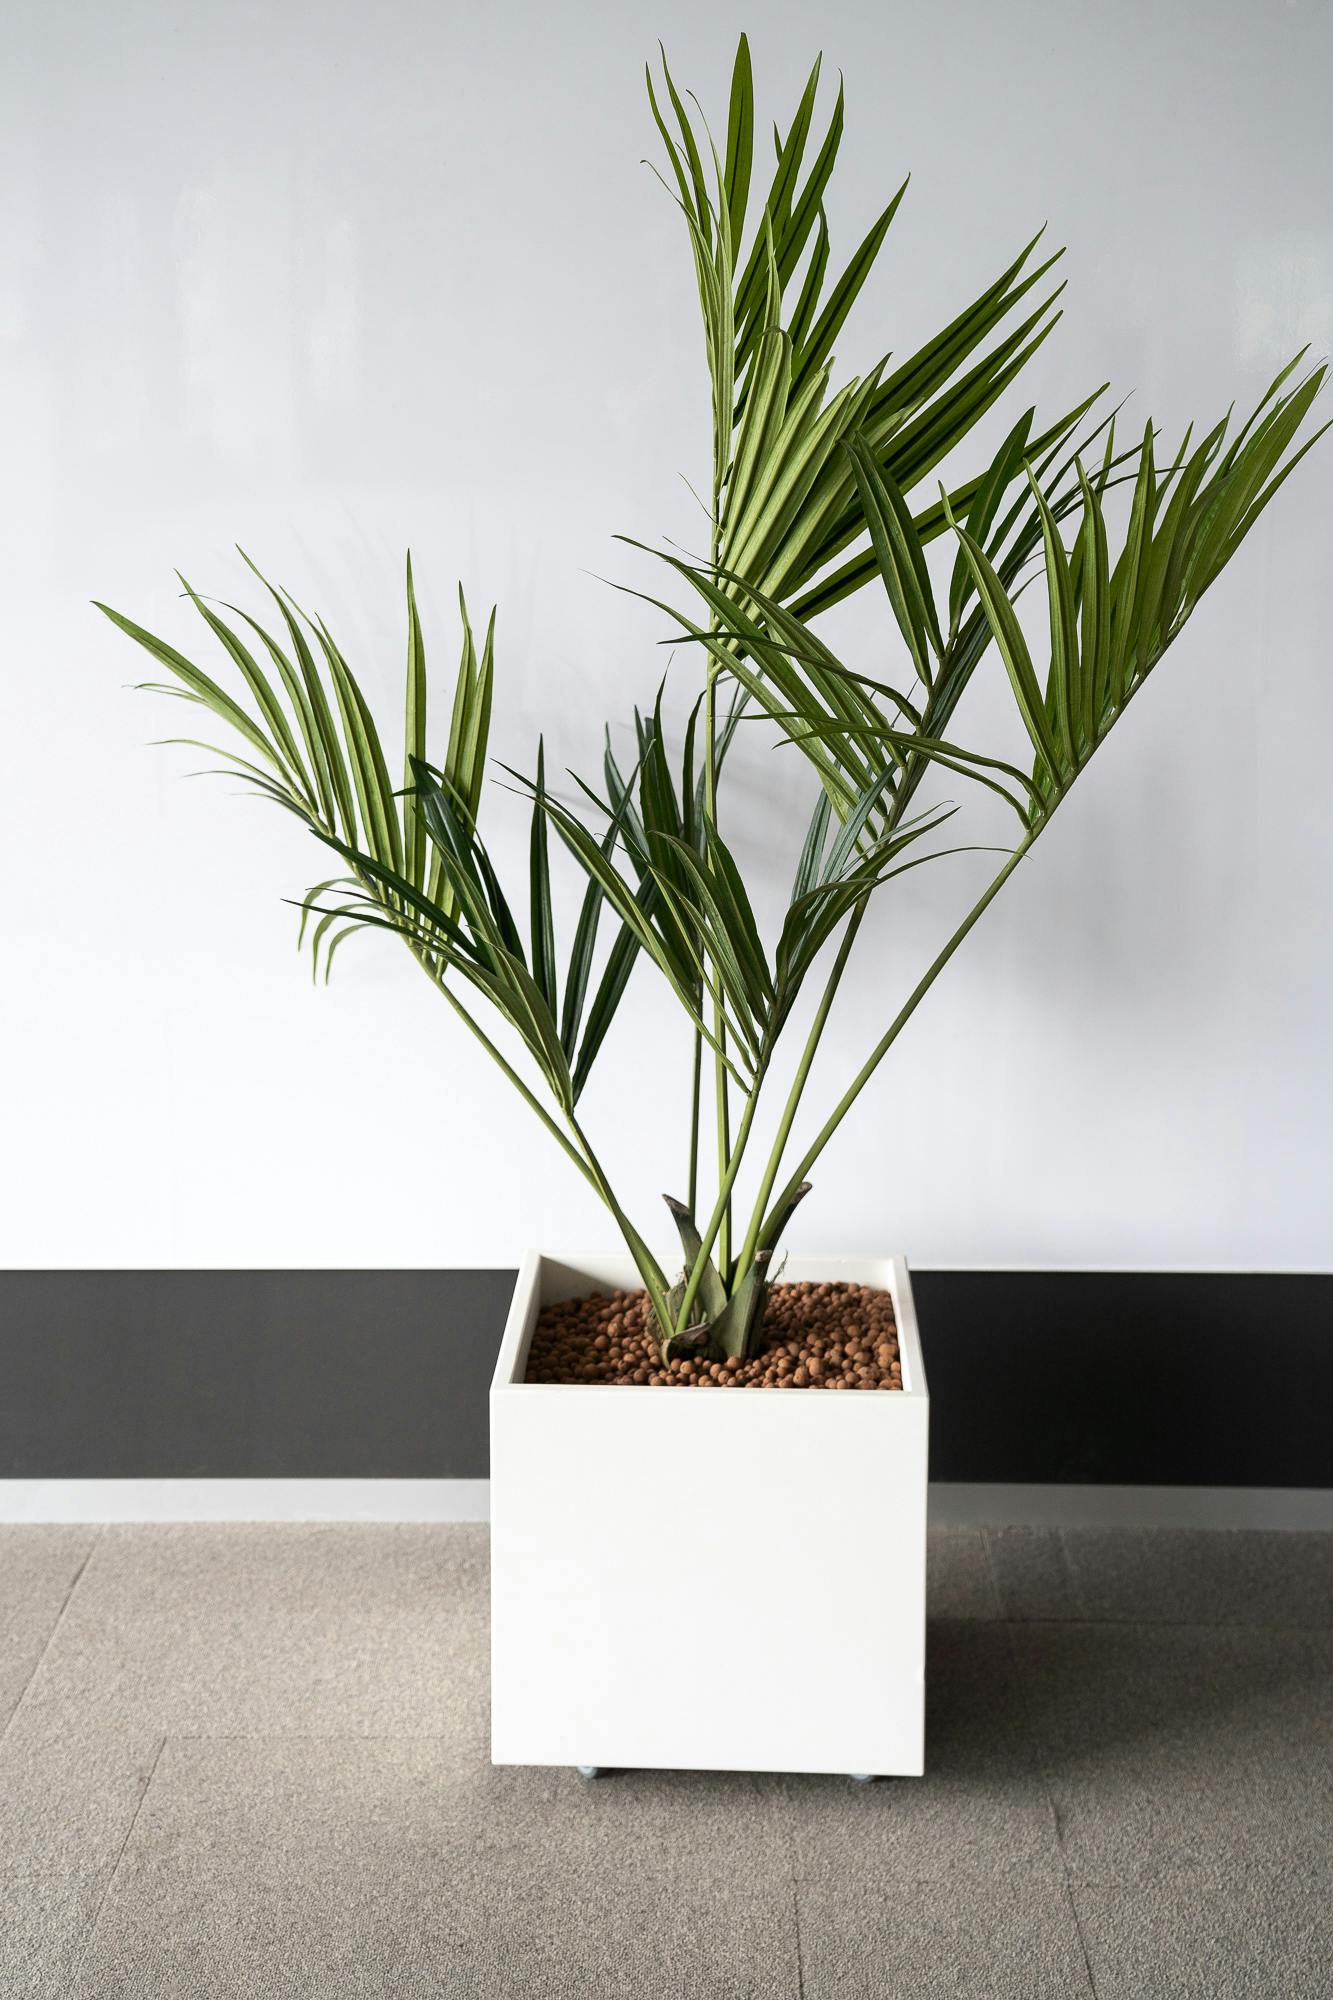 Square planter - Palm trees - Second hand quality "Miscellaneous" - Relieve Furniture